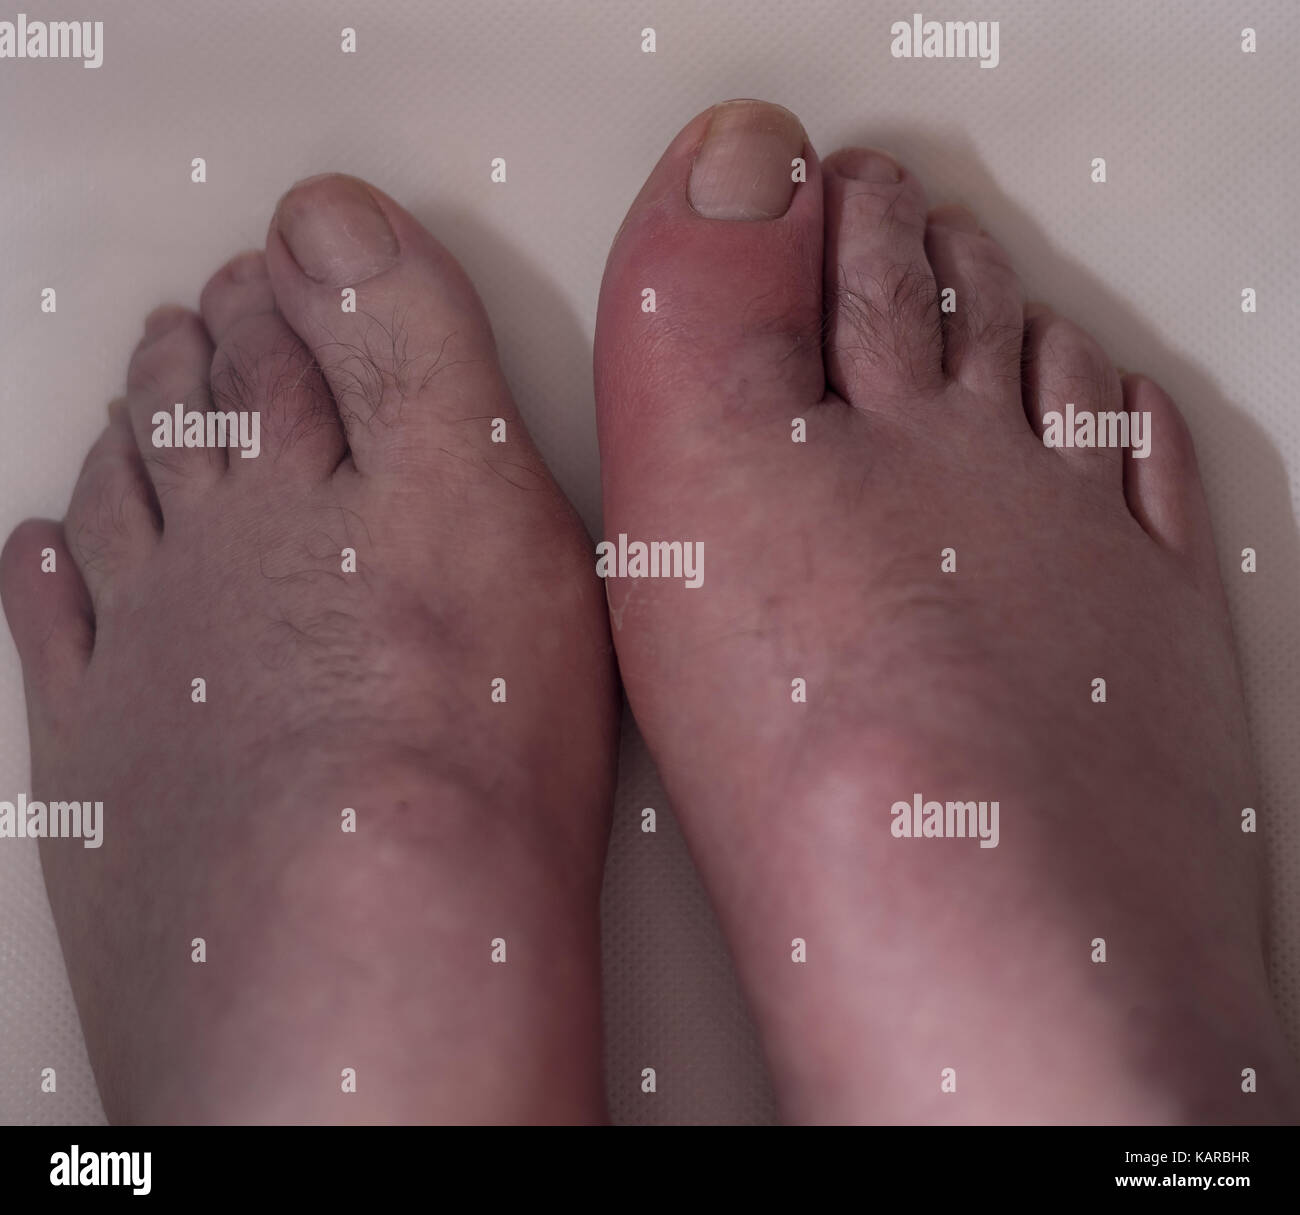 Big toe with gout beside normal big toe Stock Photo